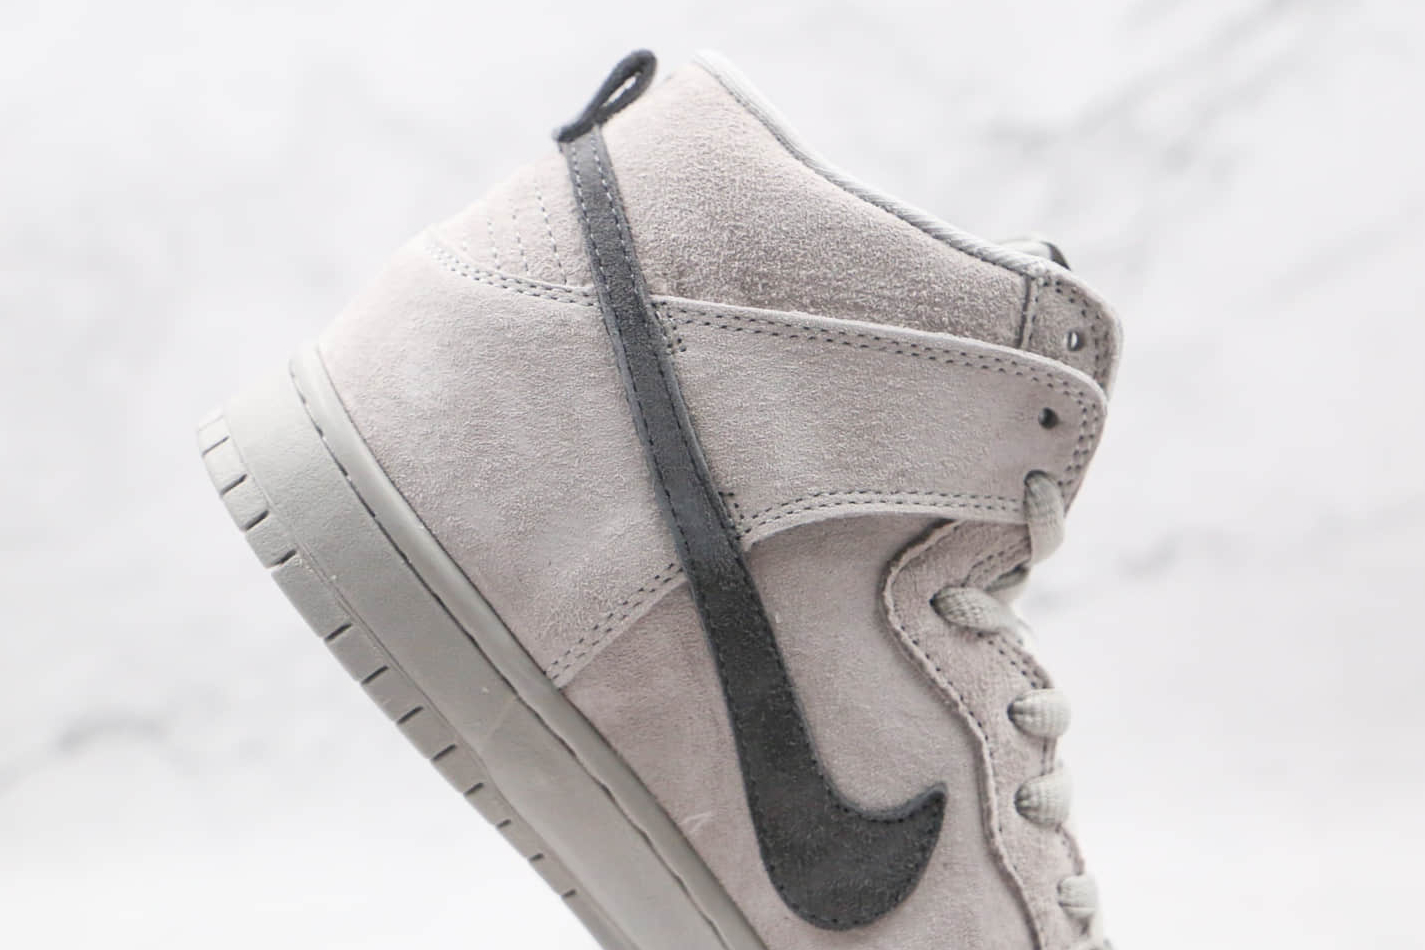 Nike SB Dunk High PRM Grey Box Metallic Silver Hyper Verde 313171-036: Shop the latest release of premium skate shoes for enhanced style and performance.